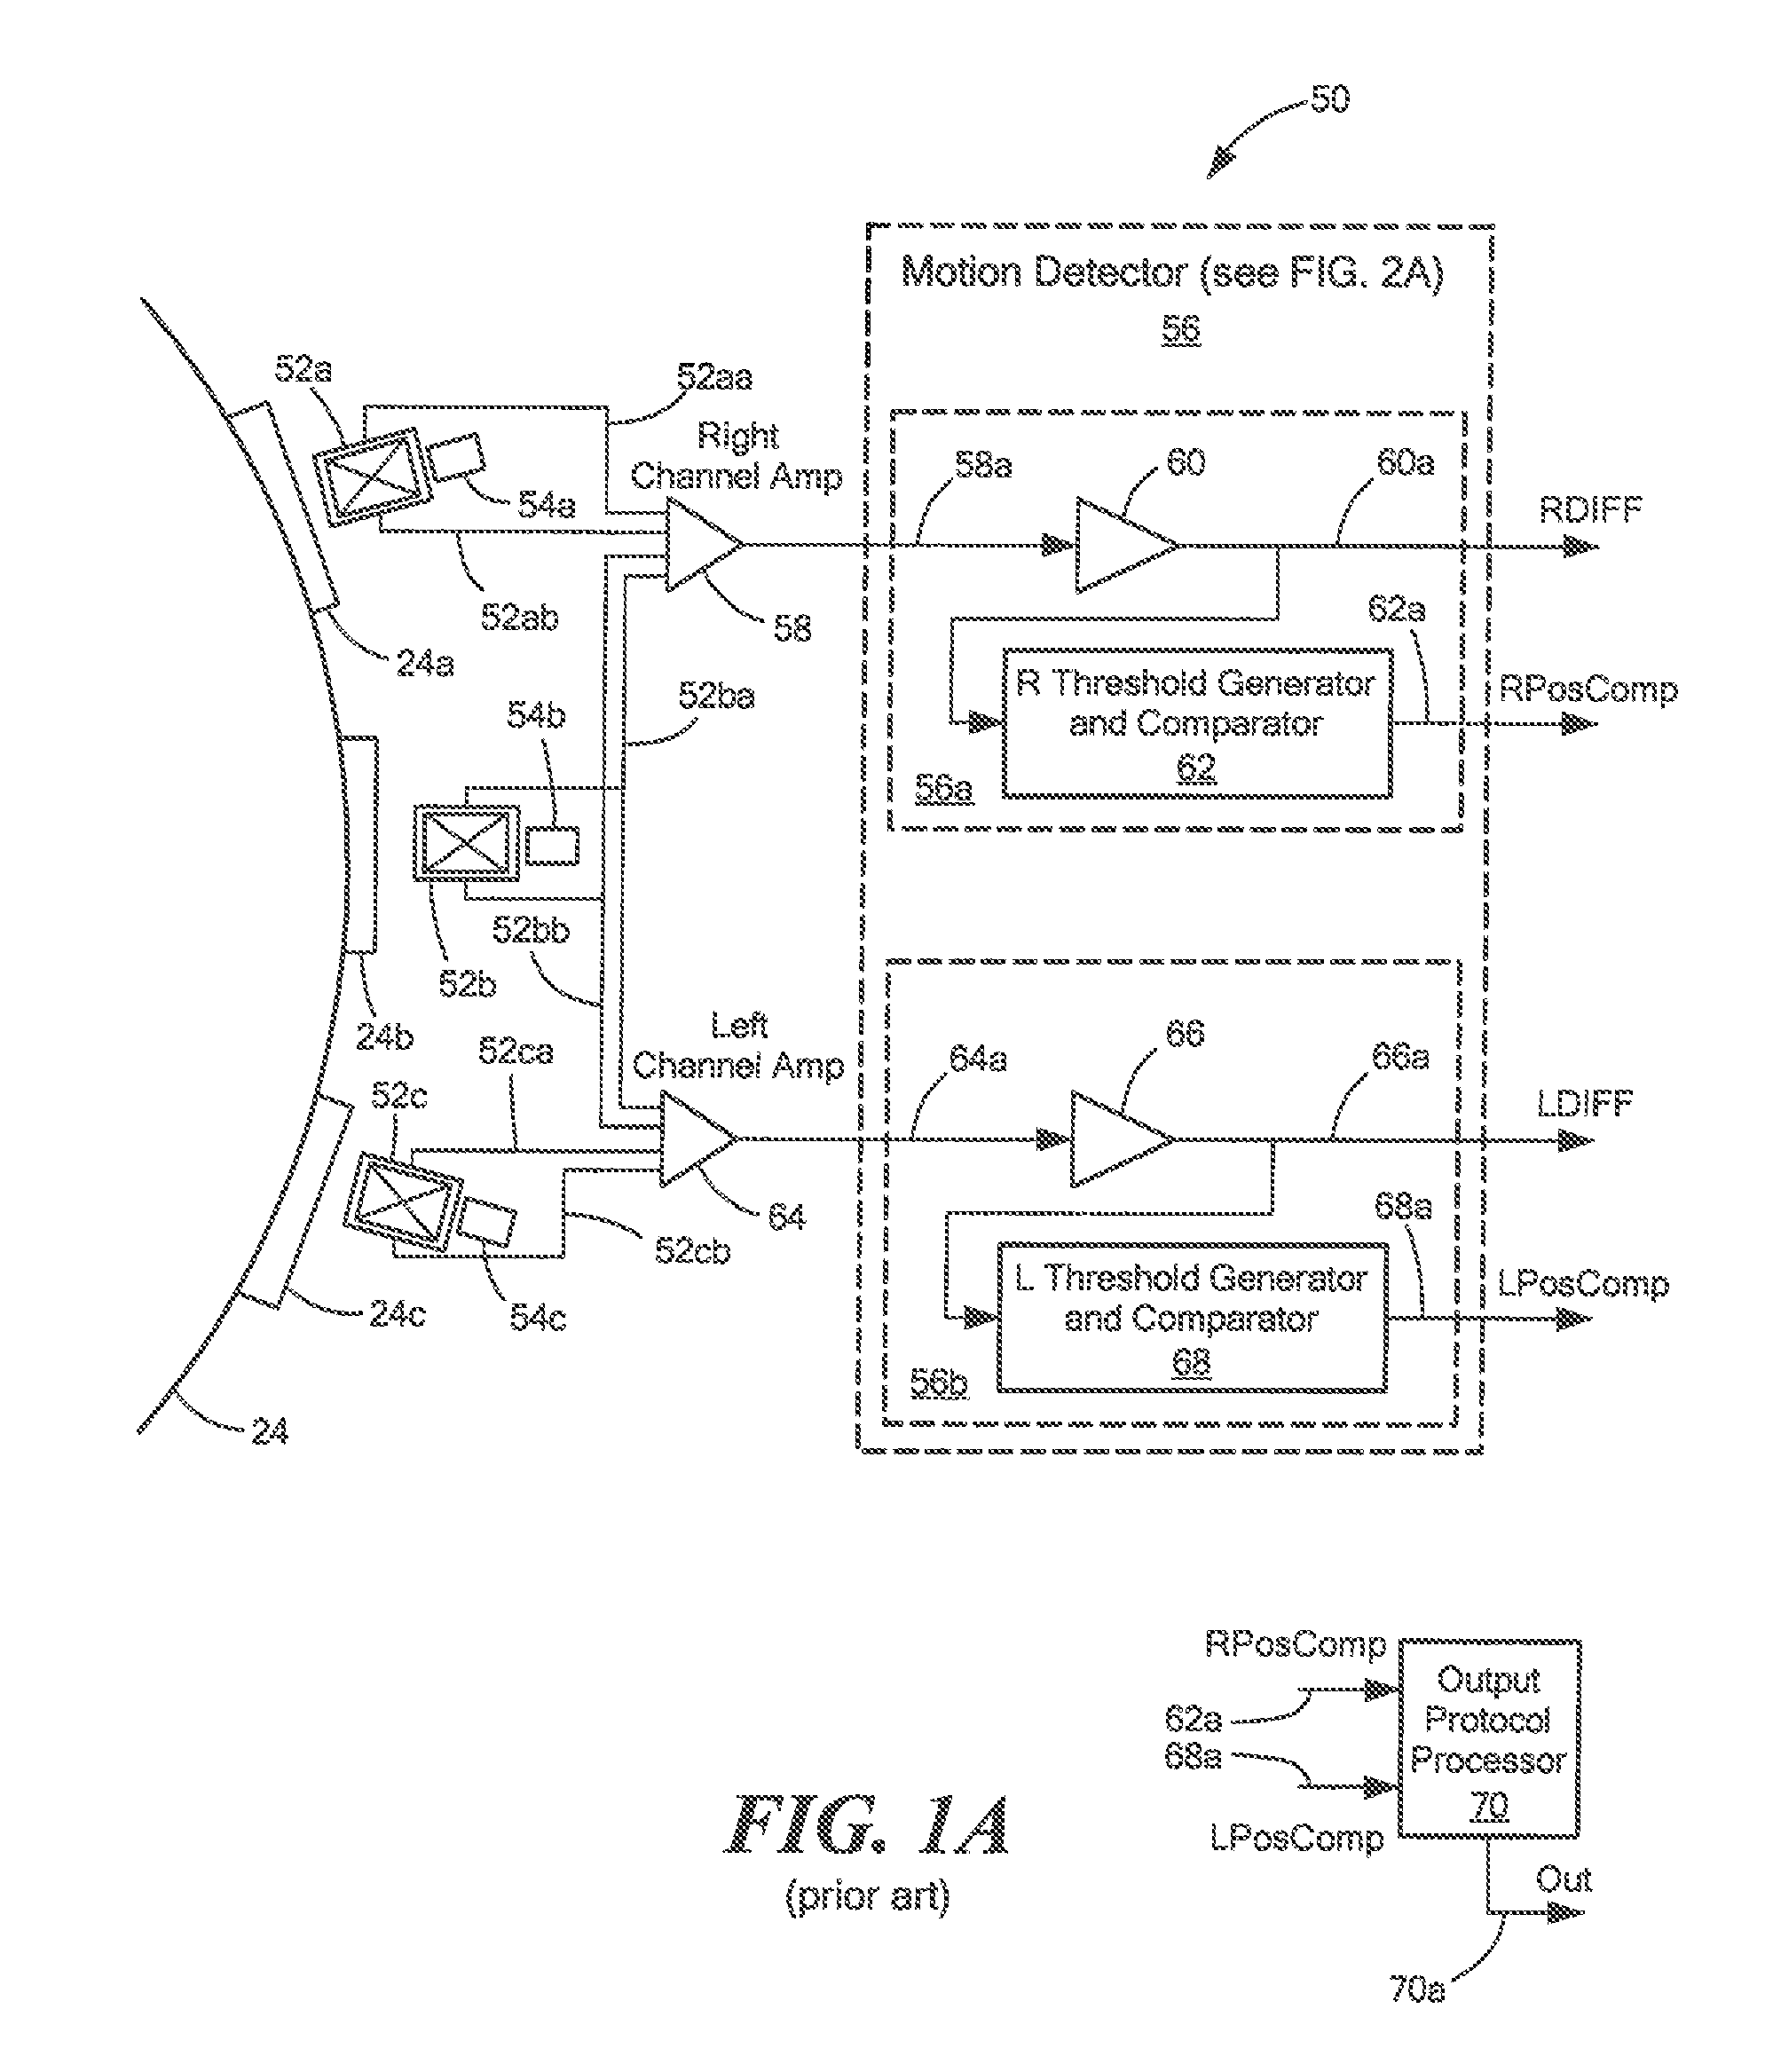 Circuits and methods for generating a threshold signal used in a magnetic field sensor based on a peak signal associated with a prior cycle of a magnetic field signal